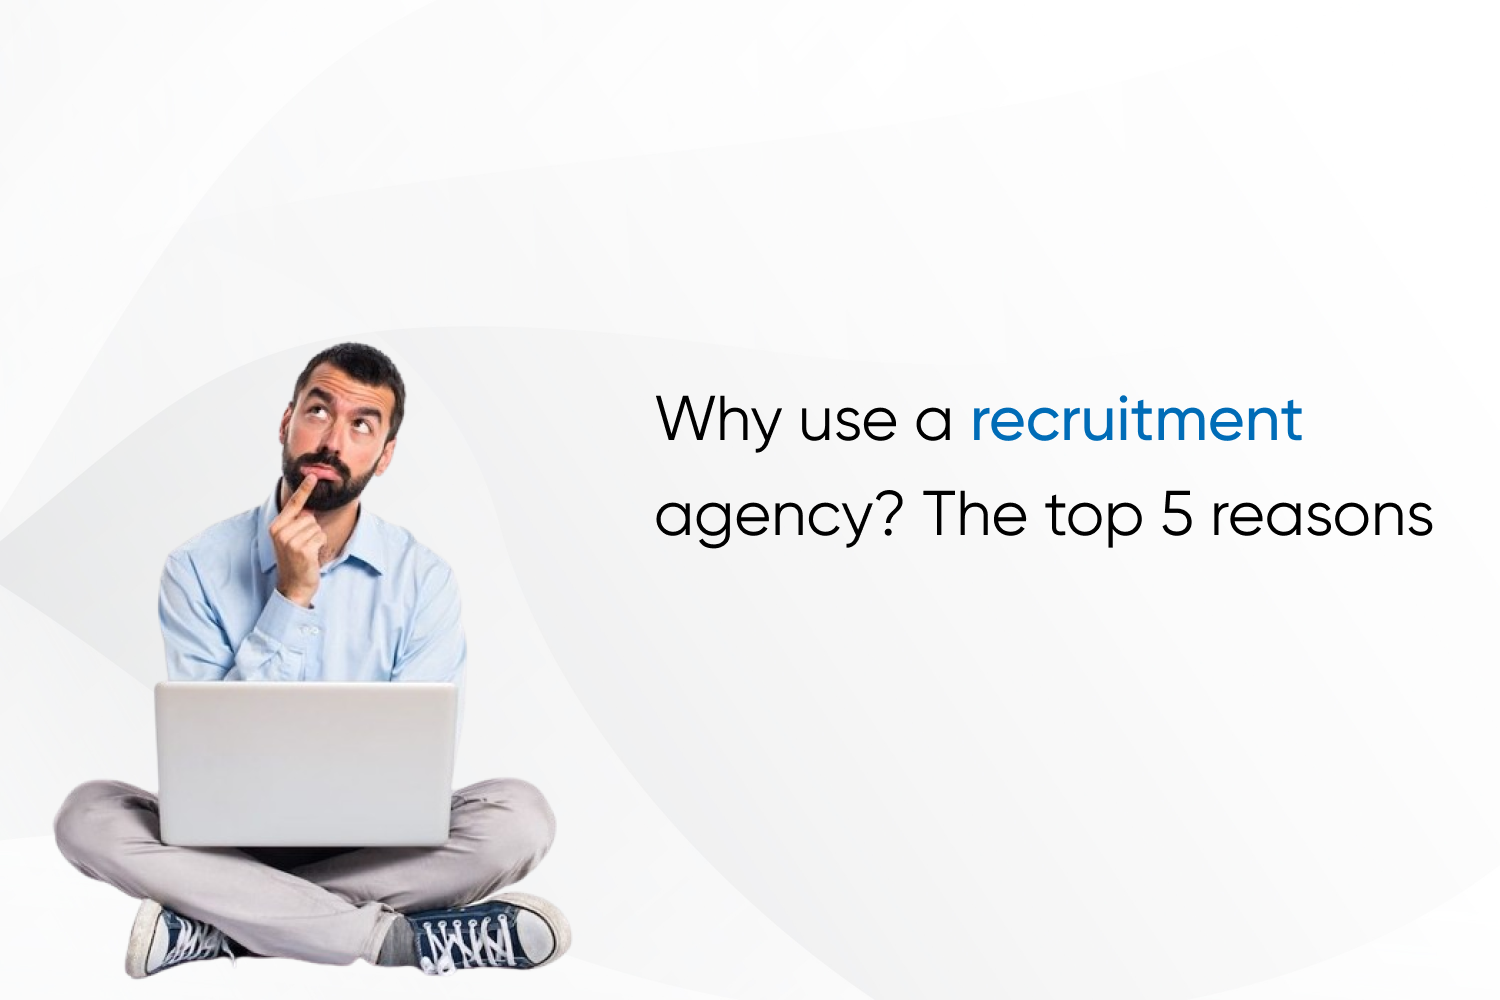 Why use a recruitment agency? The top 5 reasons